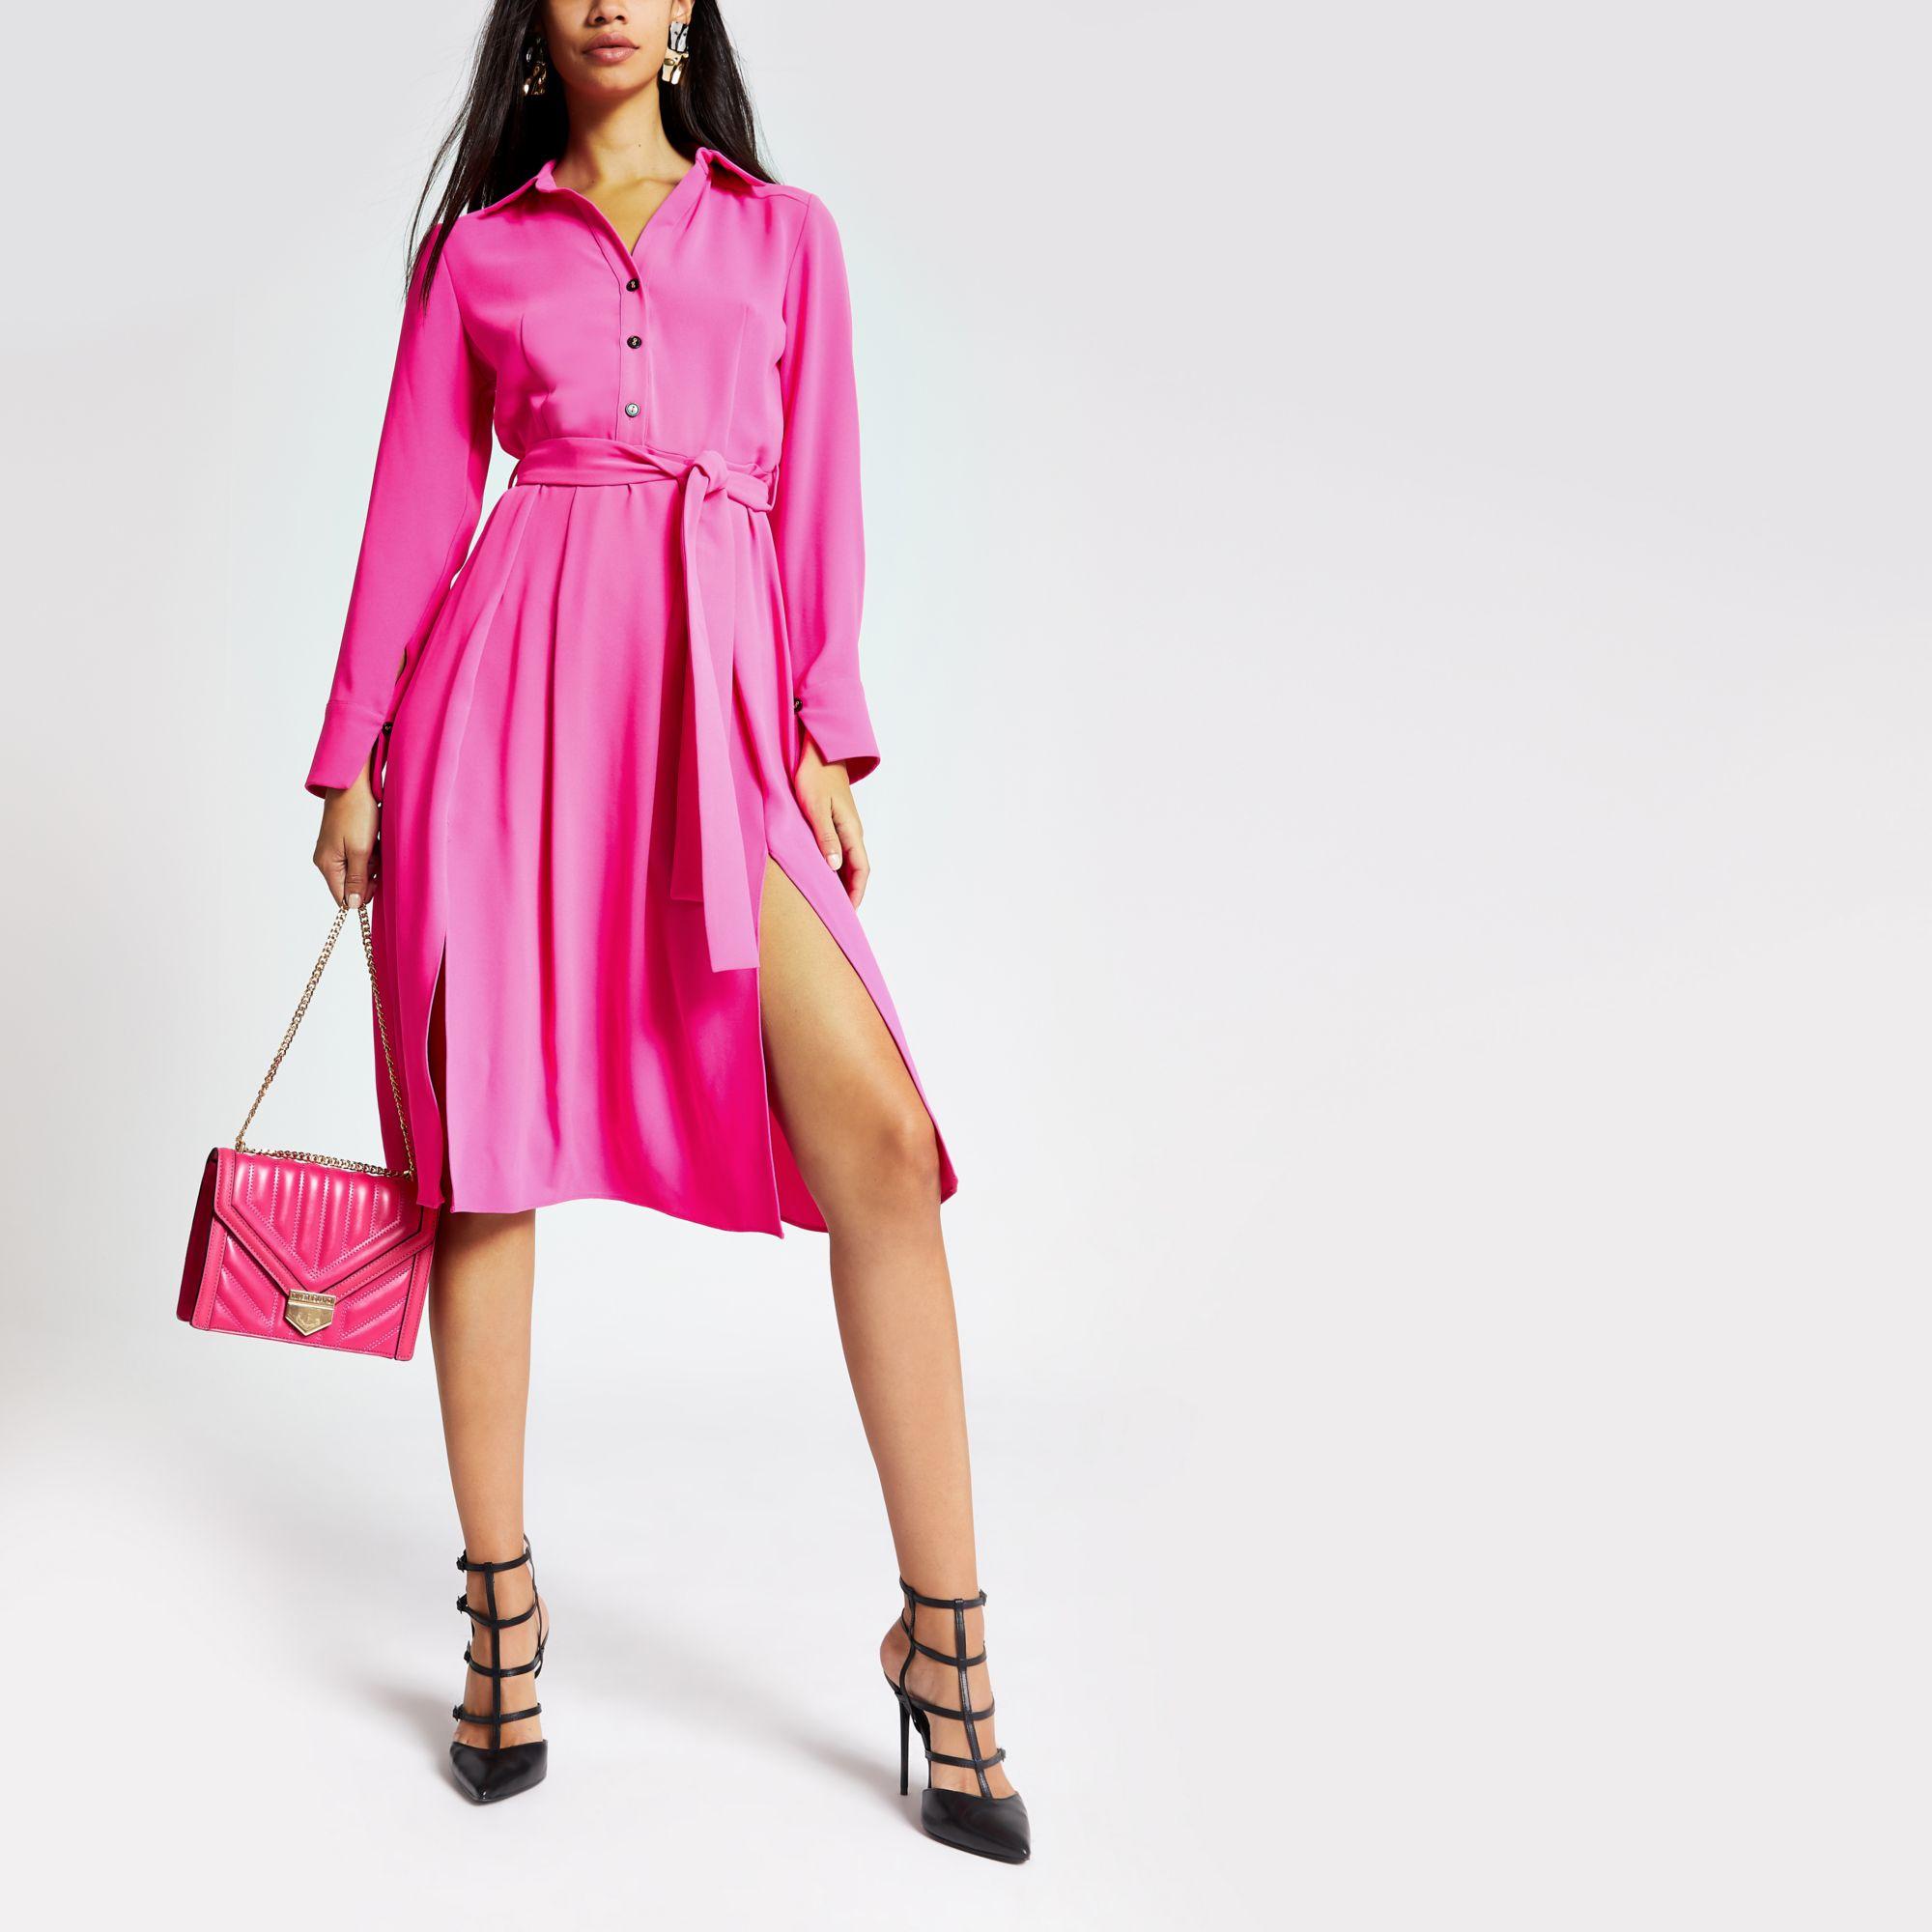 River Island Bright Long Sleeve Shirt Dress in Pink | Lyst